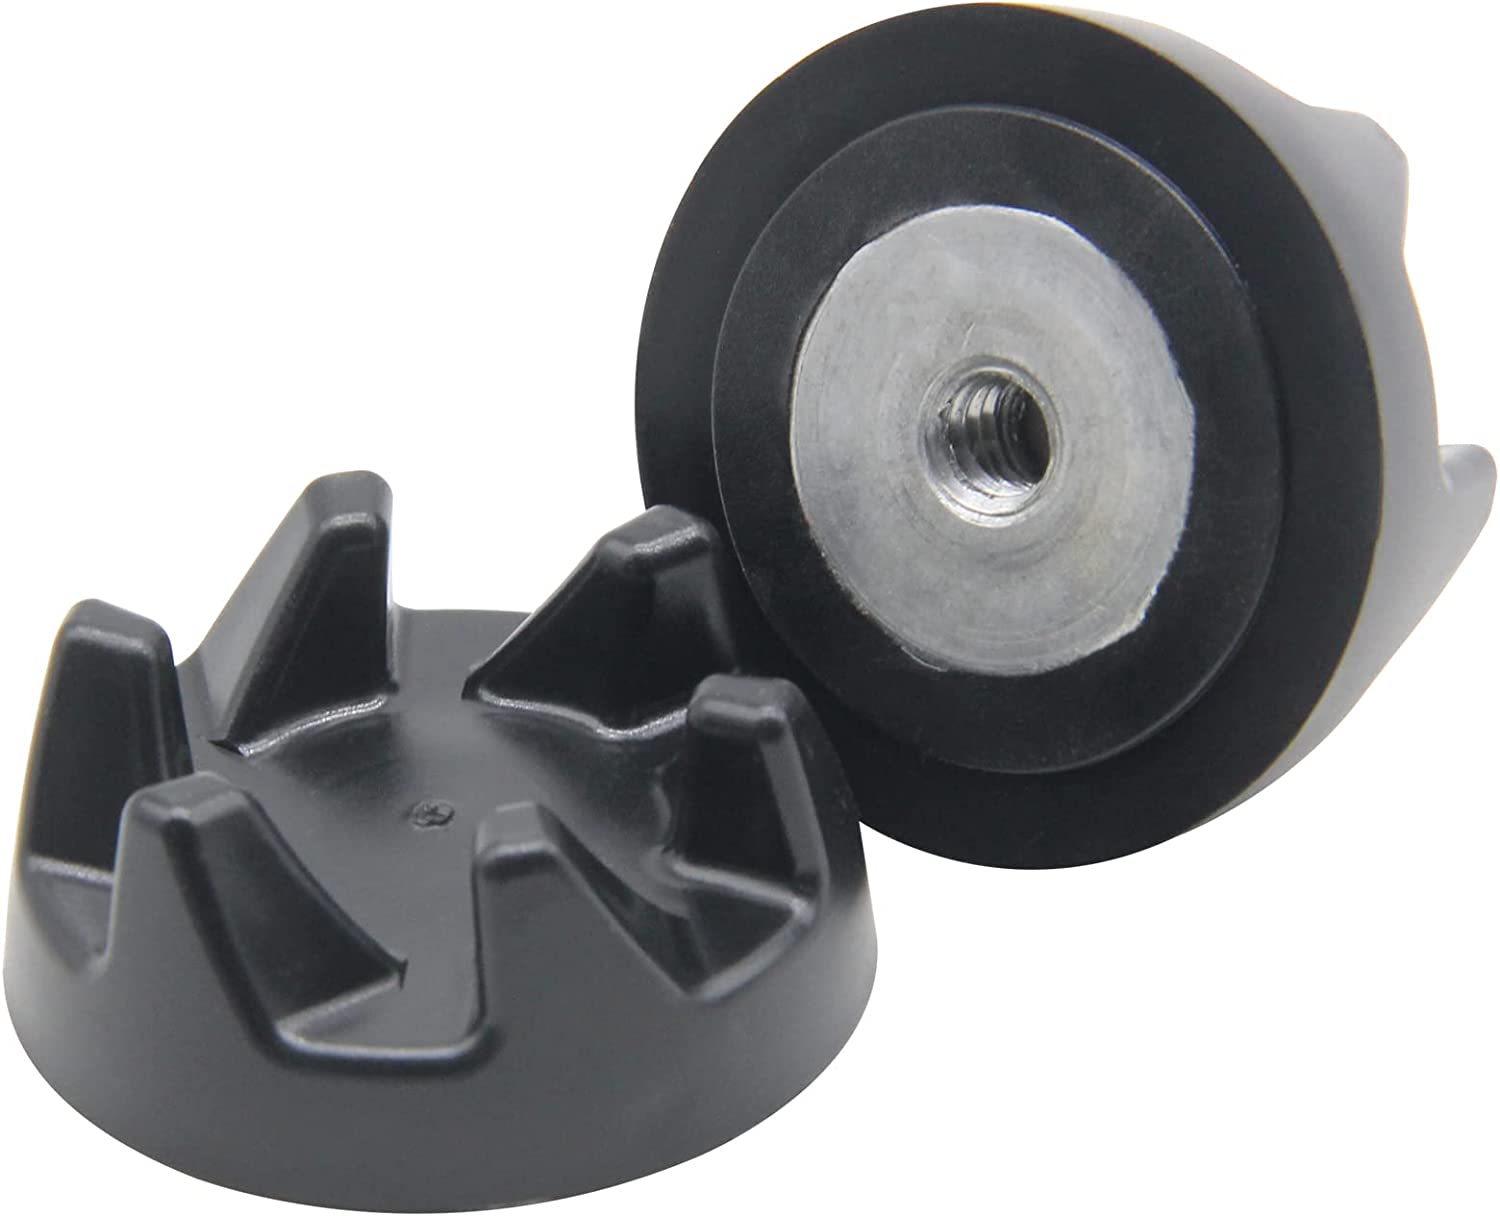 Blender Coupler with Spanner Kit Replacement Parts Compatible with